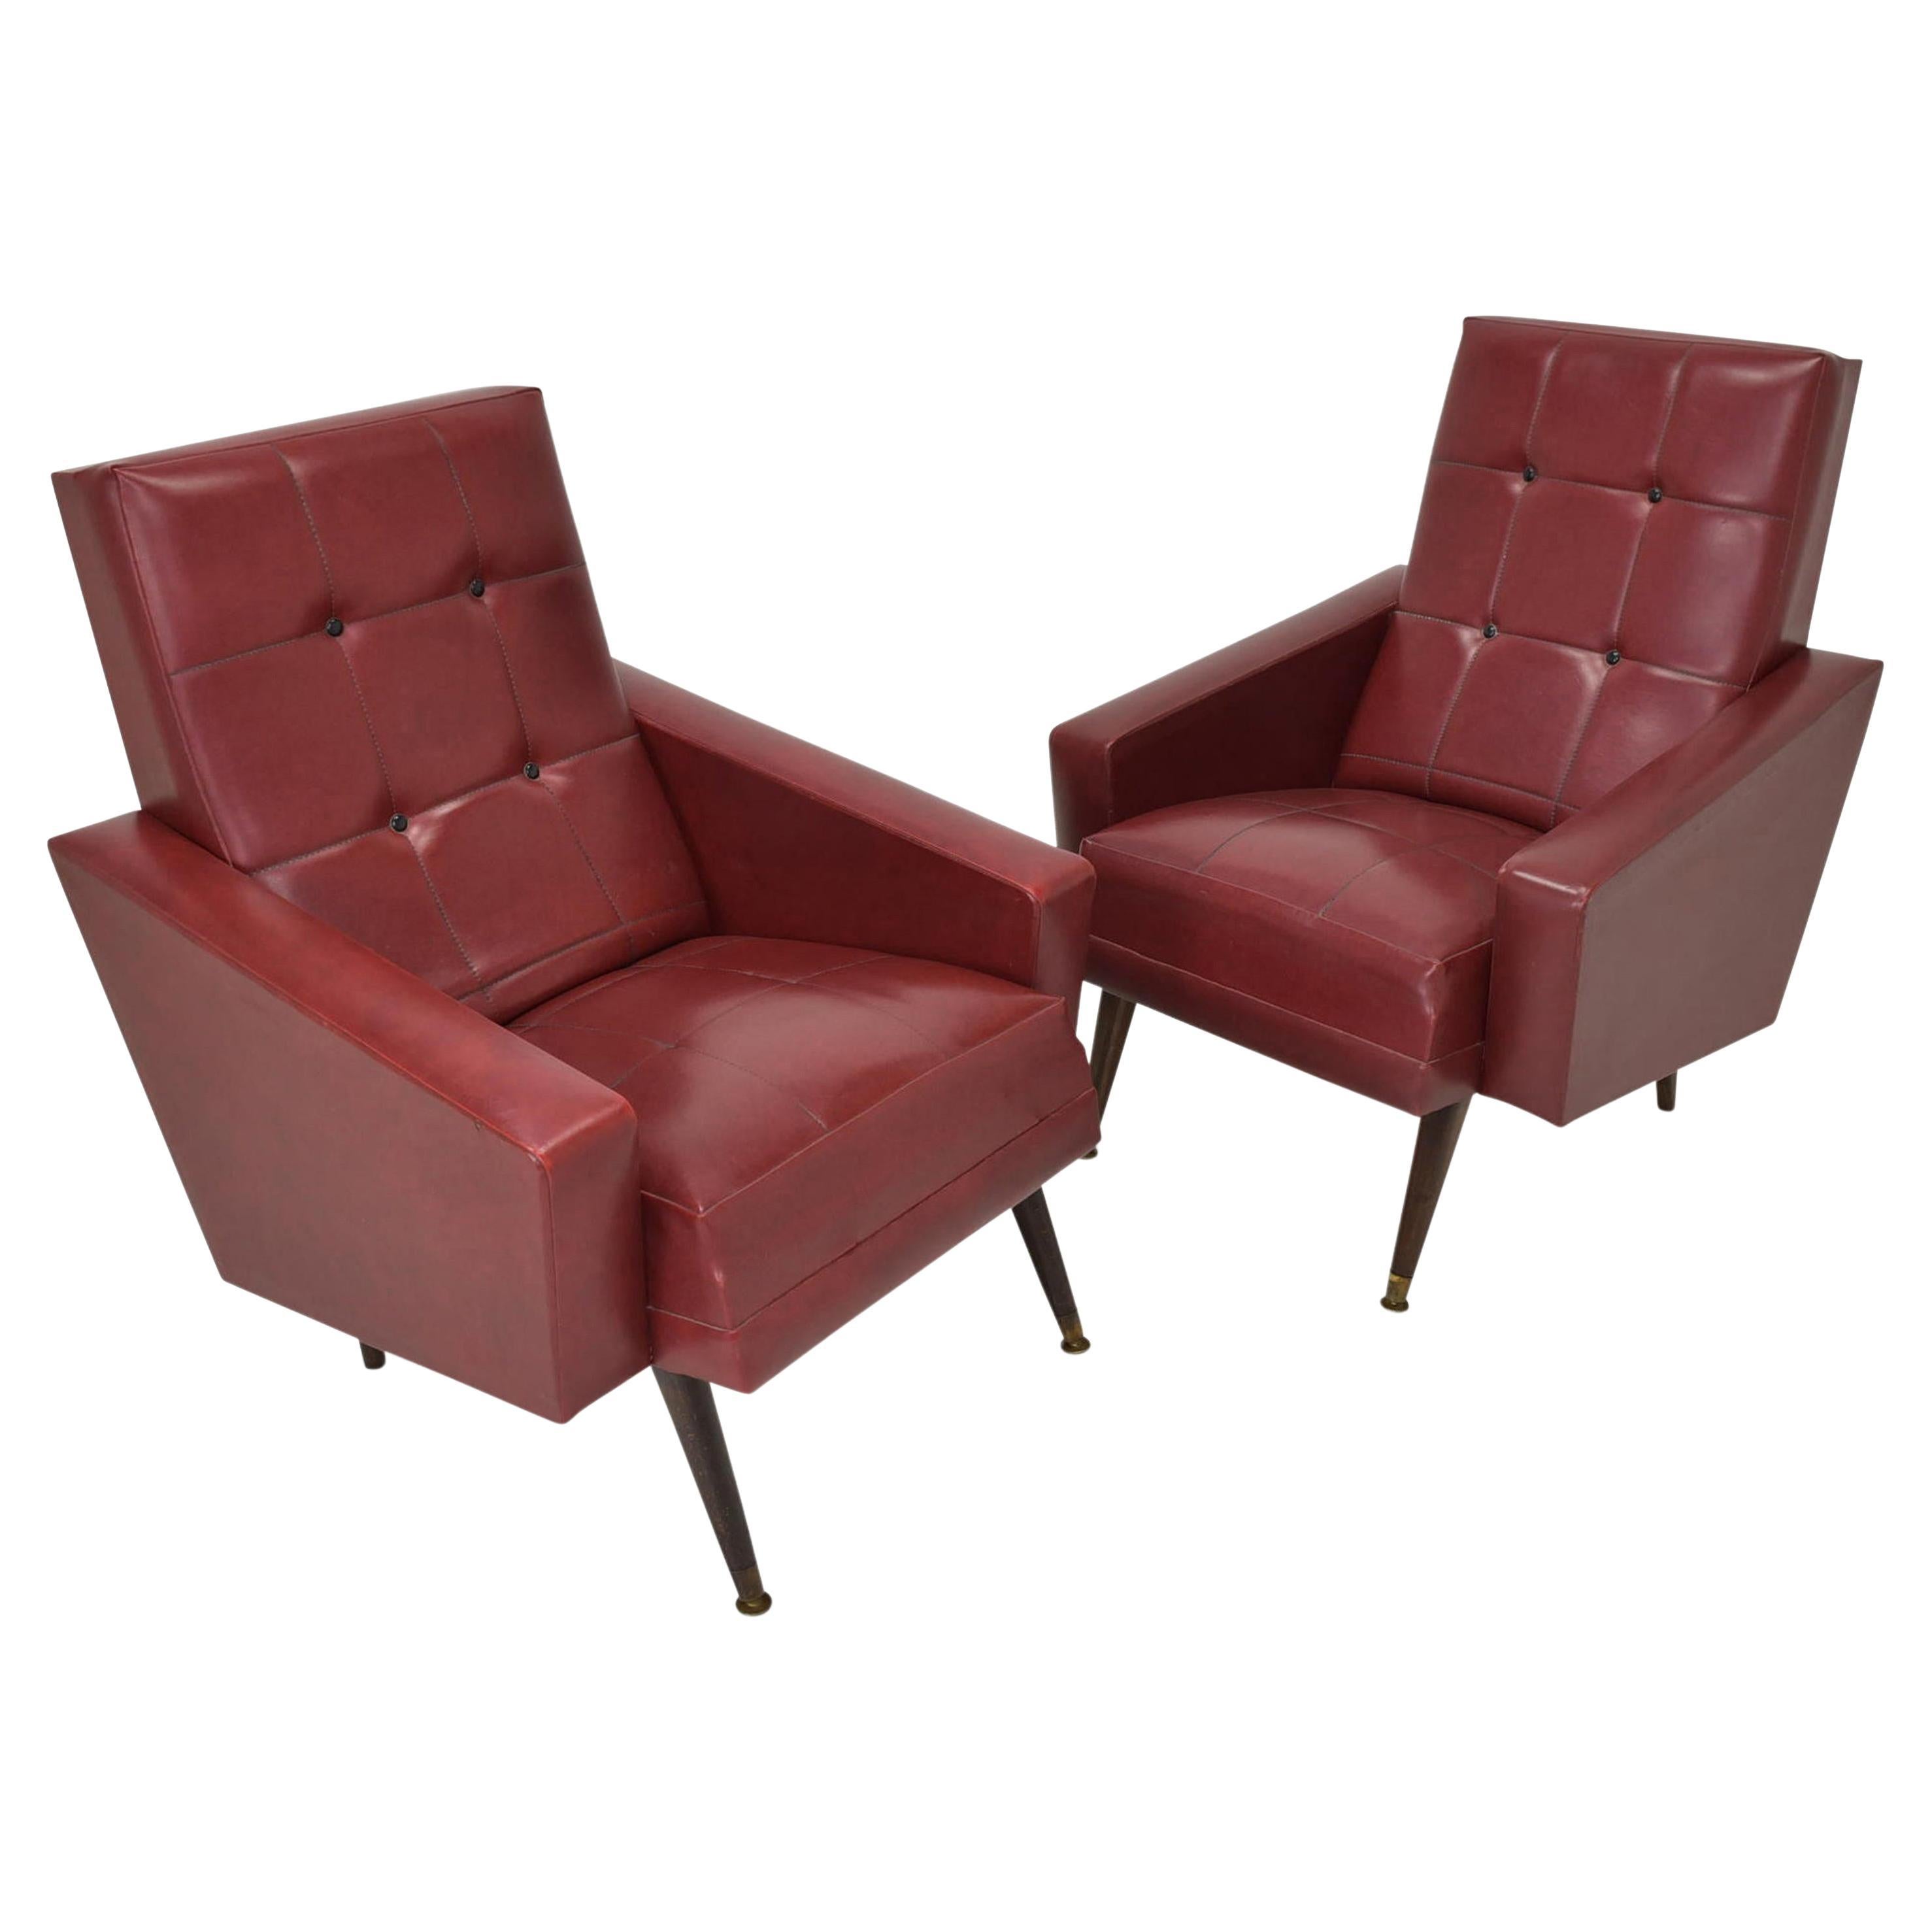 Pair of Vintage Armchairs 2x Lounge Chair / Red Skai Rockabilly Chairs, 50s 60s For Sale